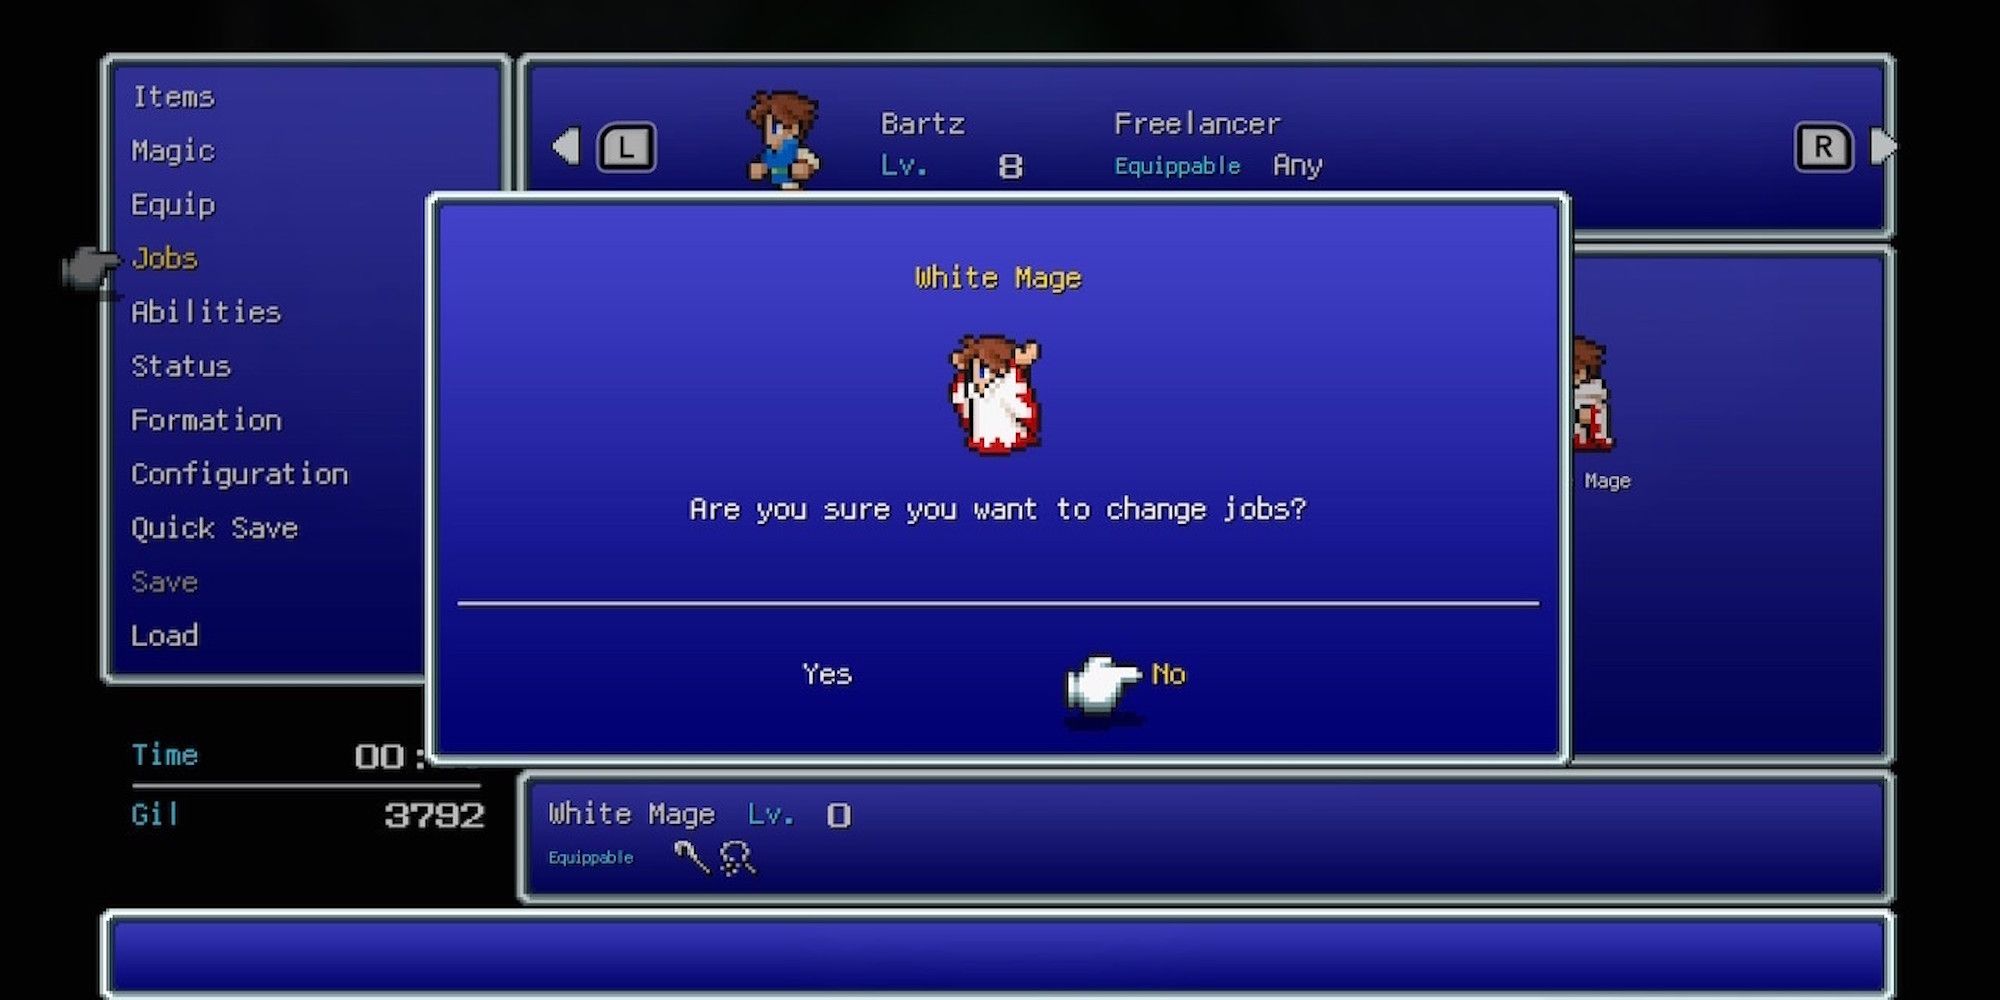 Bartz as a White Mage in Final Fantasy 5